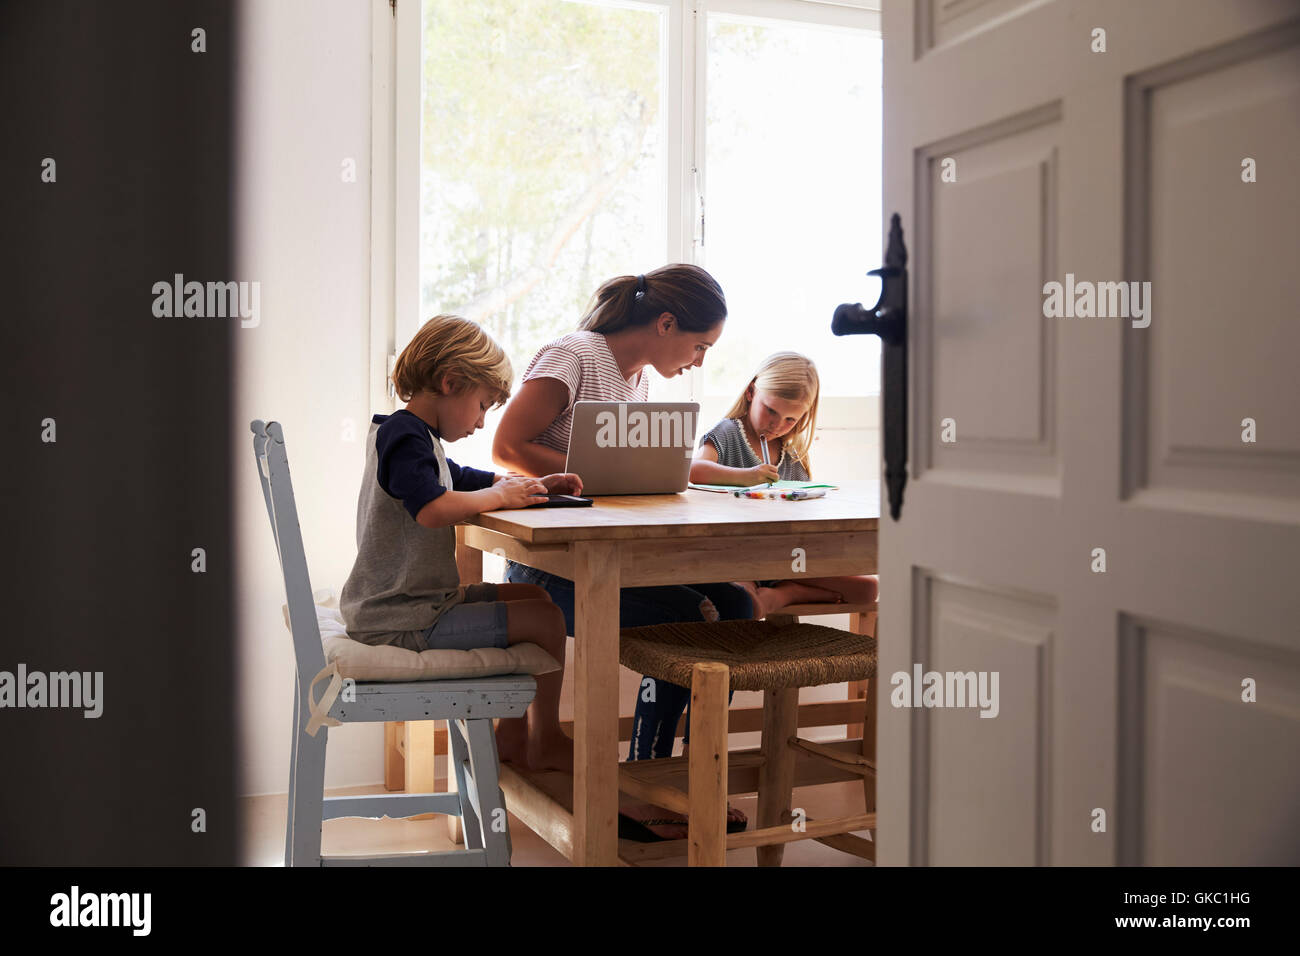 Mum and two kids working in kitchen, close up from doorway Stock Photo